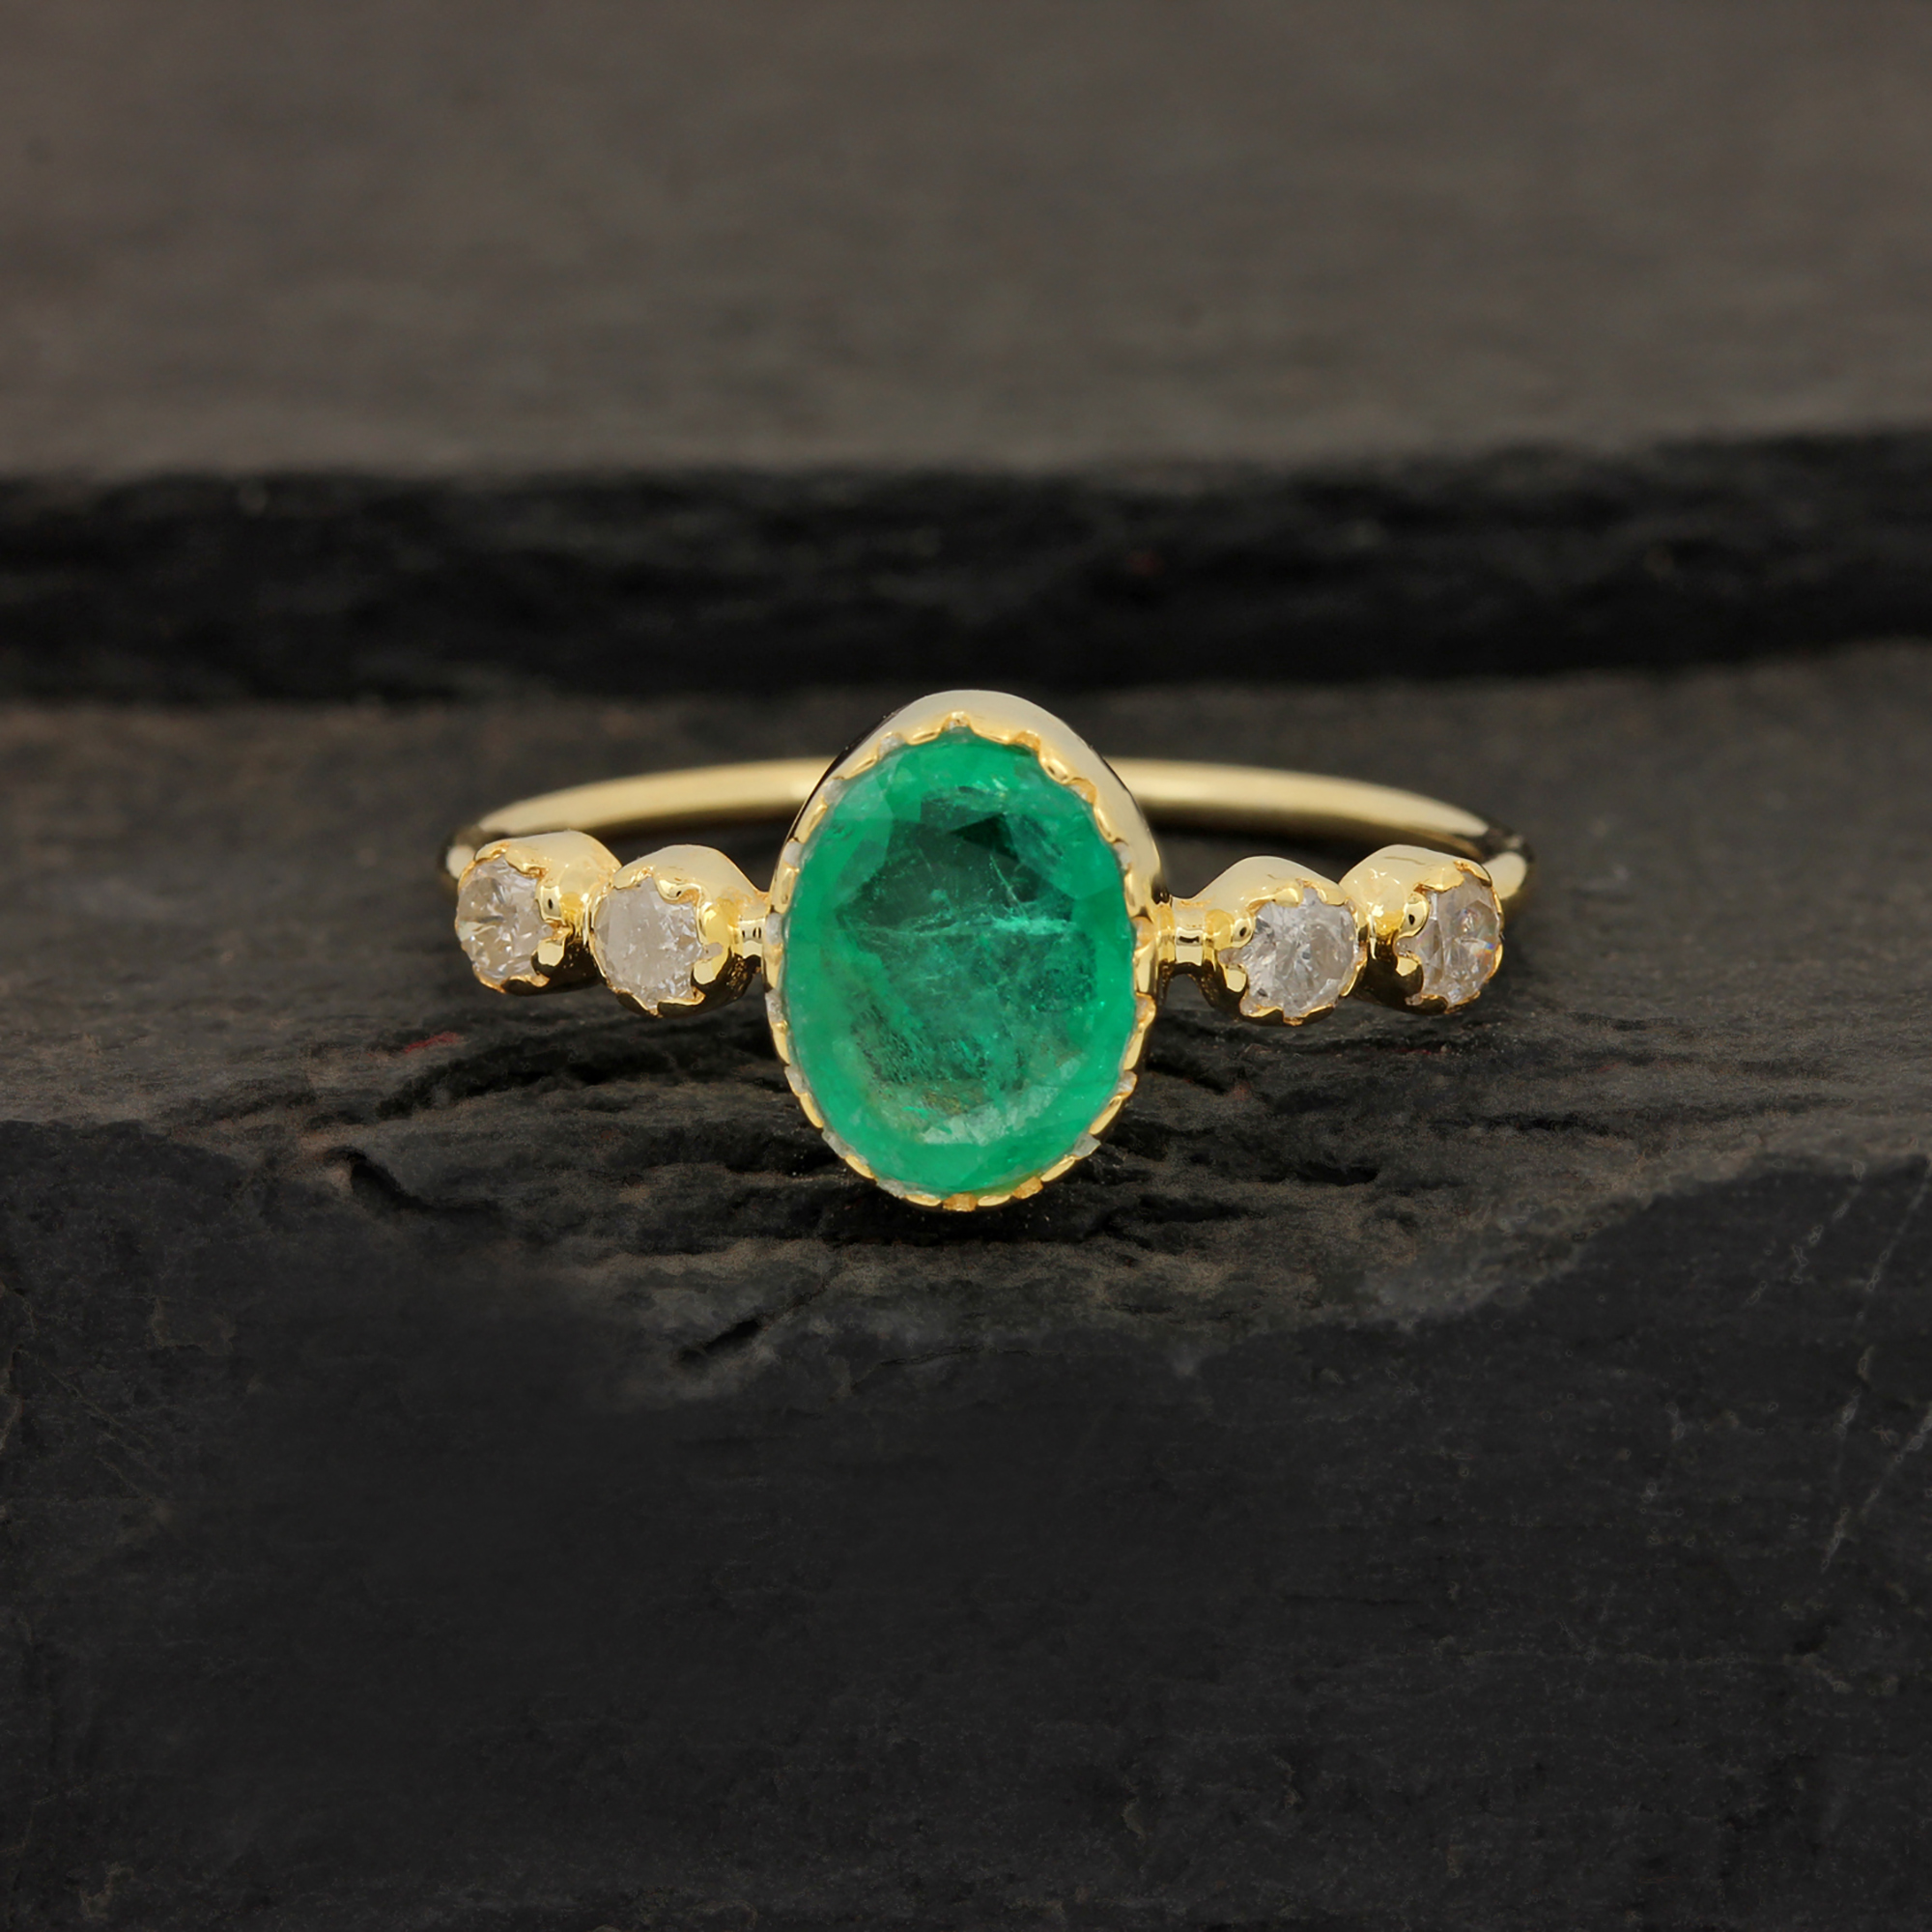 Solid 14k Gold Diamond Solitaire Emerald Ring